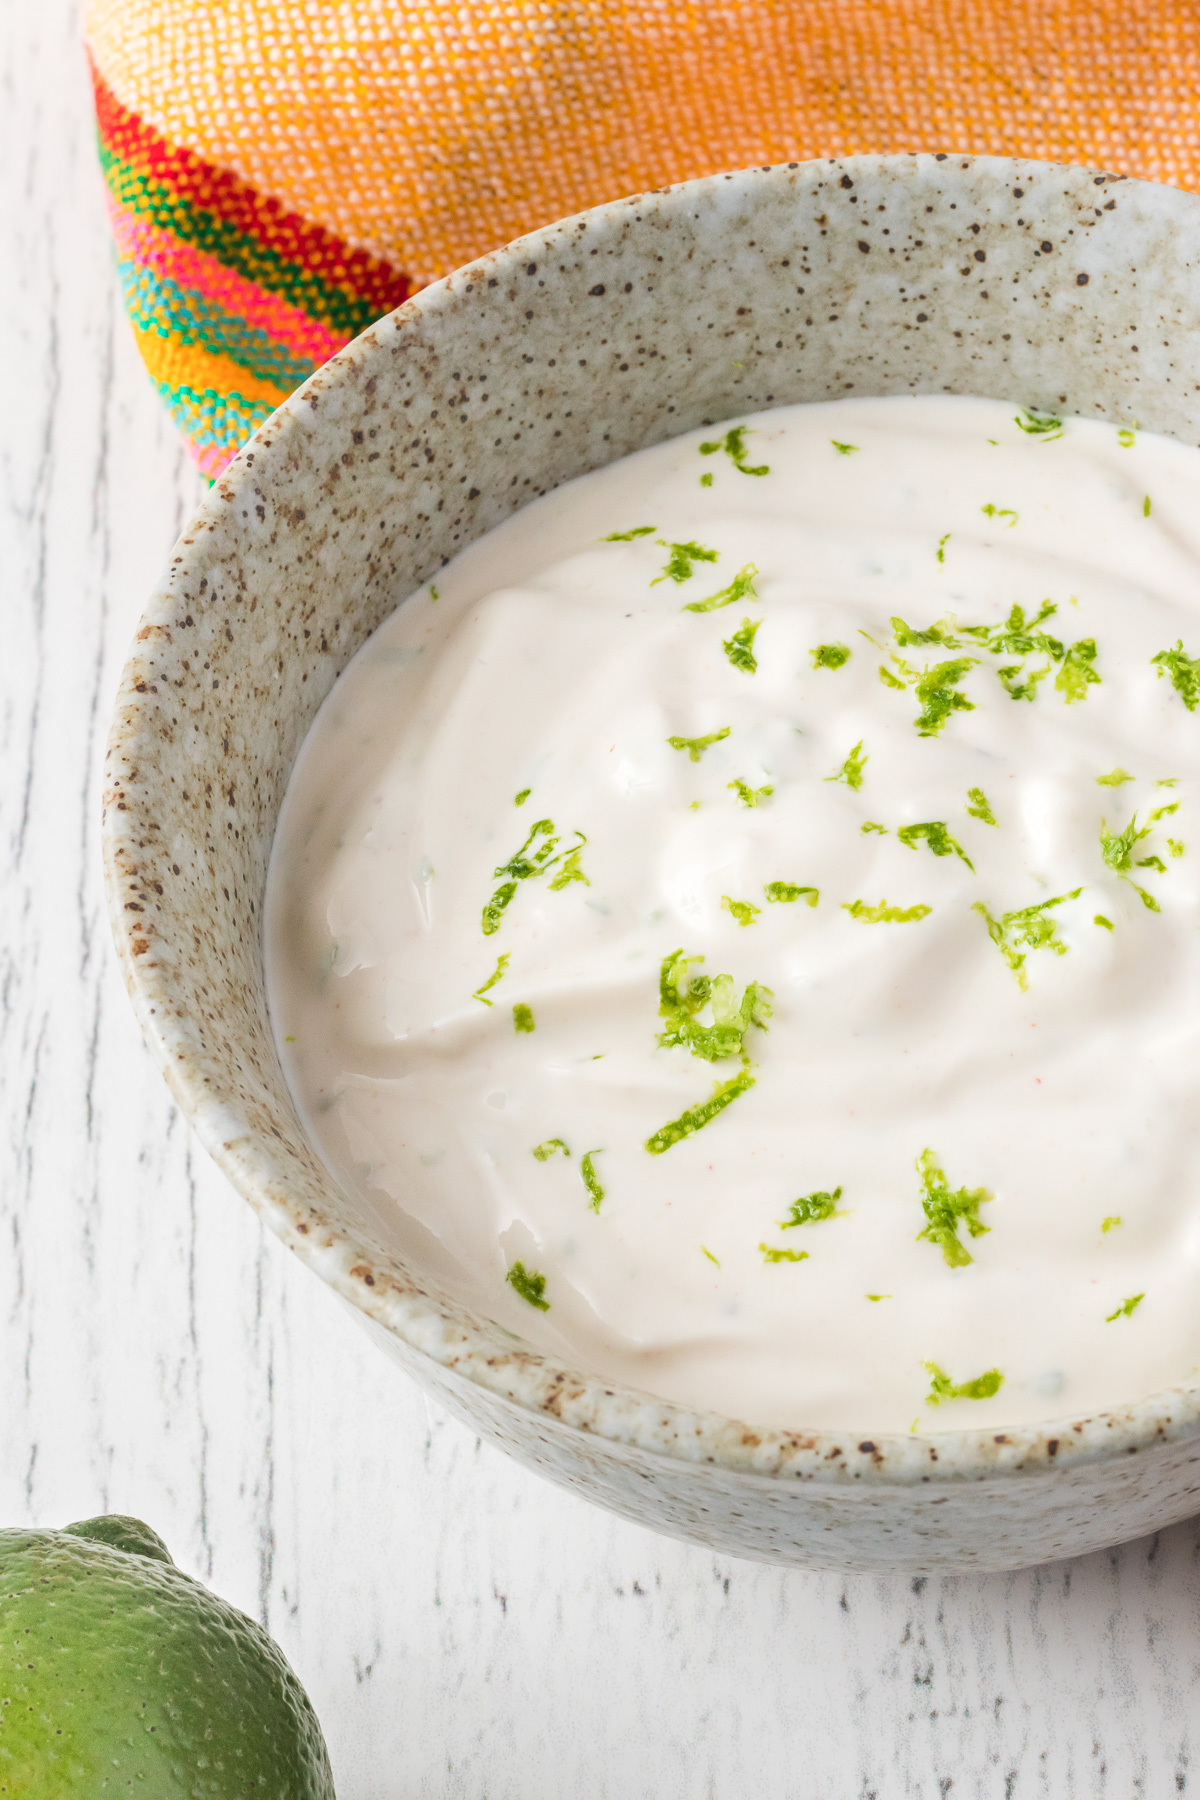 Lime Crema is a versatile and tangy condiment that adds a burst of flavor to a wide array of dishes. Its creamy texture and bright flavor make it a perfect topping for everything from tacos and quesadillas to grilled meats and seafood. Use it as a dipping sauce, a salad dressing, or a dollop on top of your favorite Mexican foods! via @foodhussy